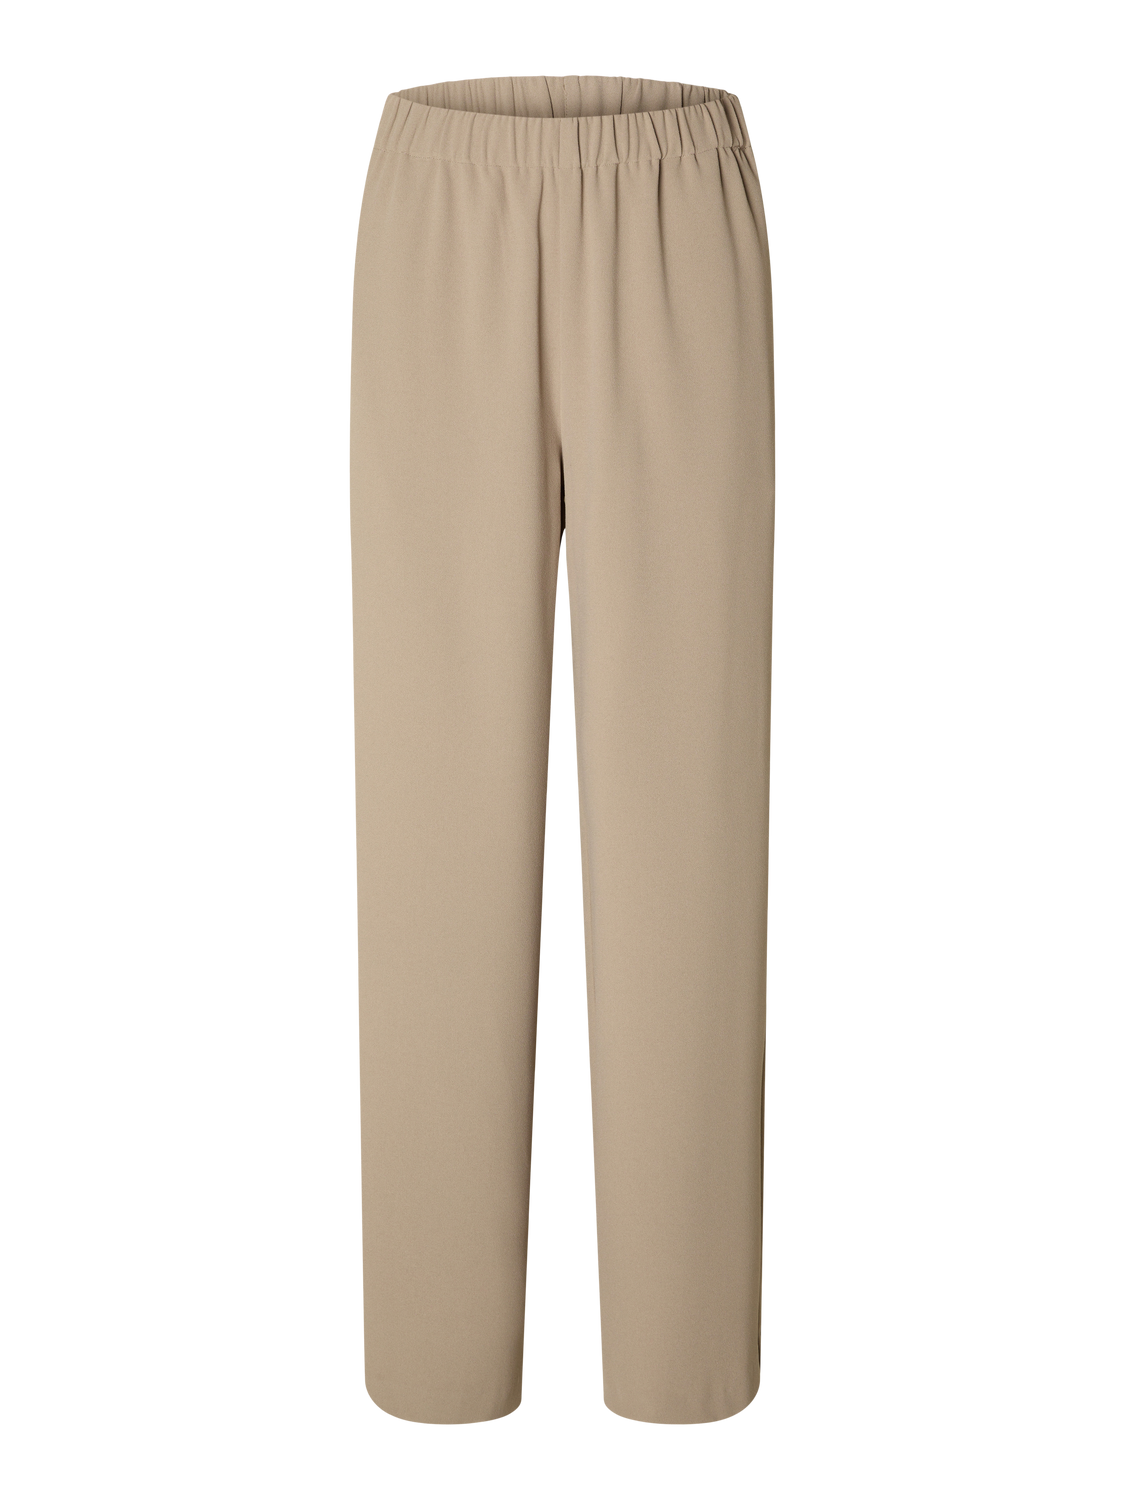 SLFTINNI-RELAXED Pants - Greige